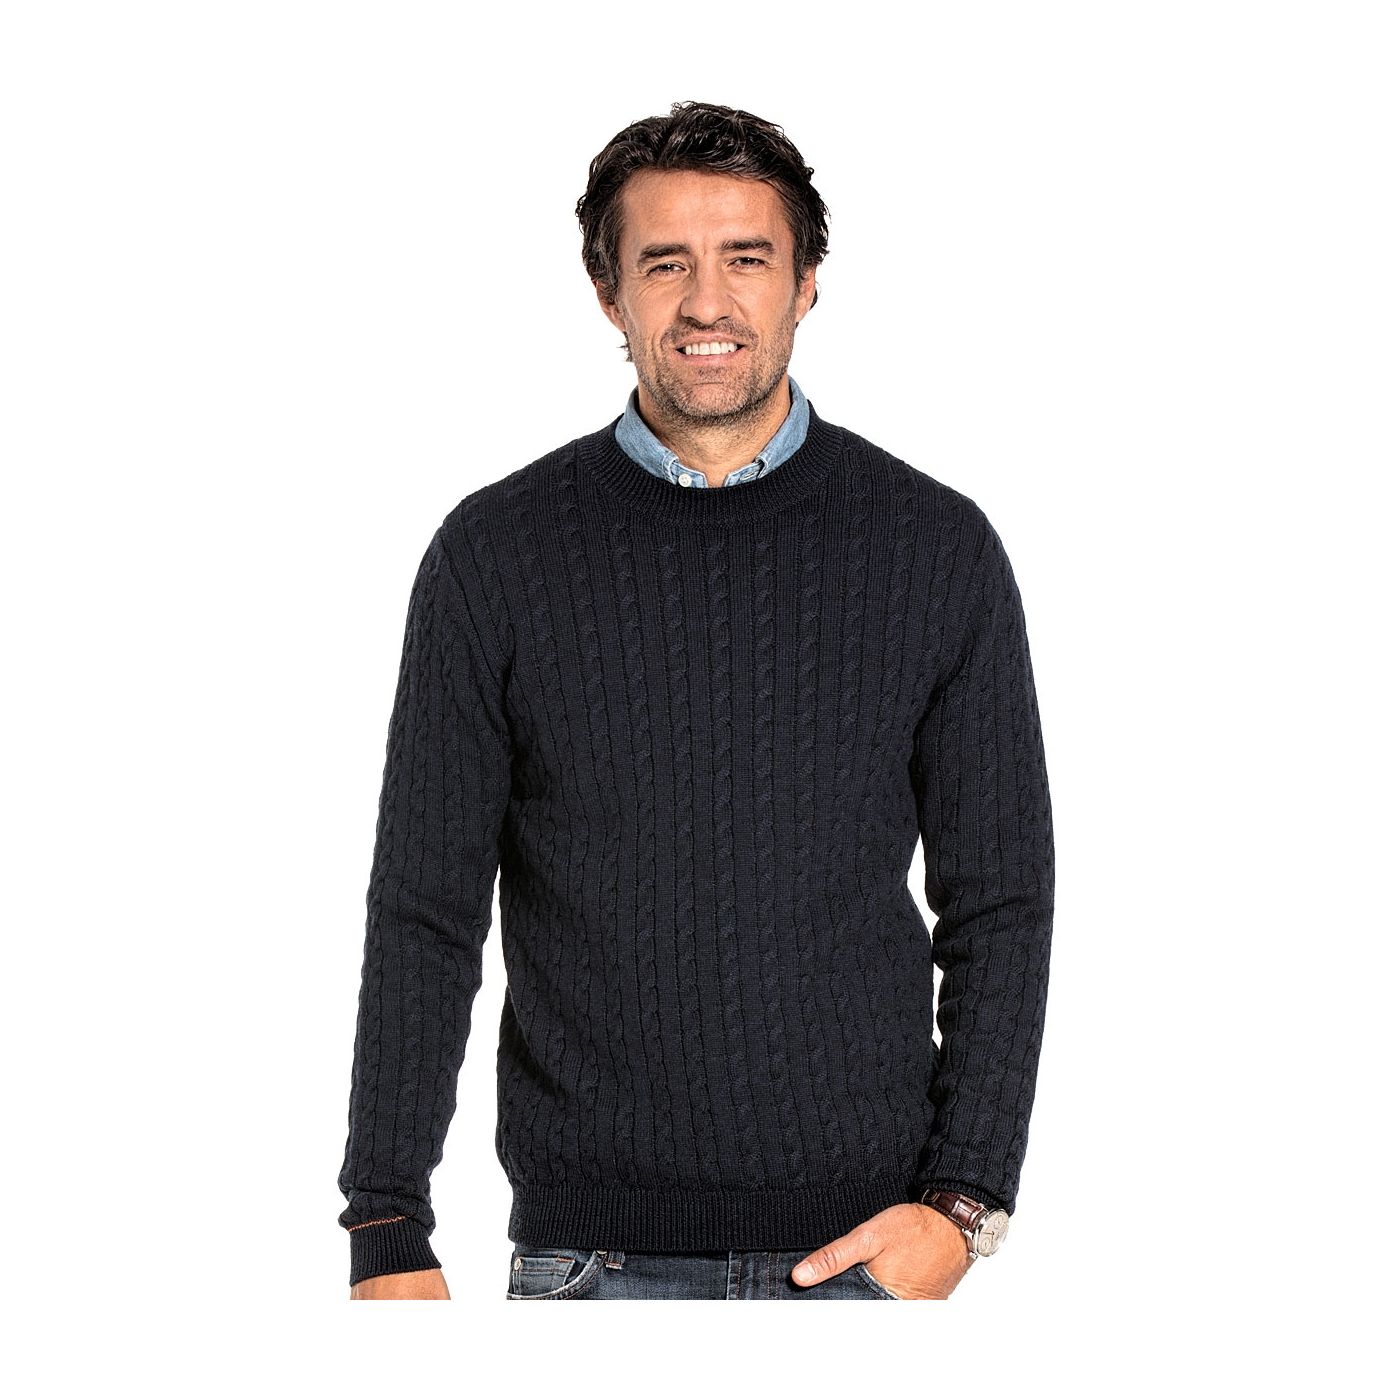 Cable knit sweater for men made of Merino wool in Dark blue